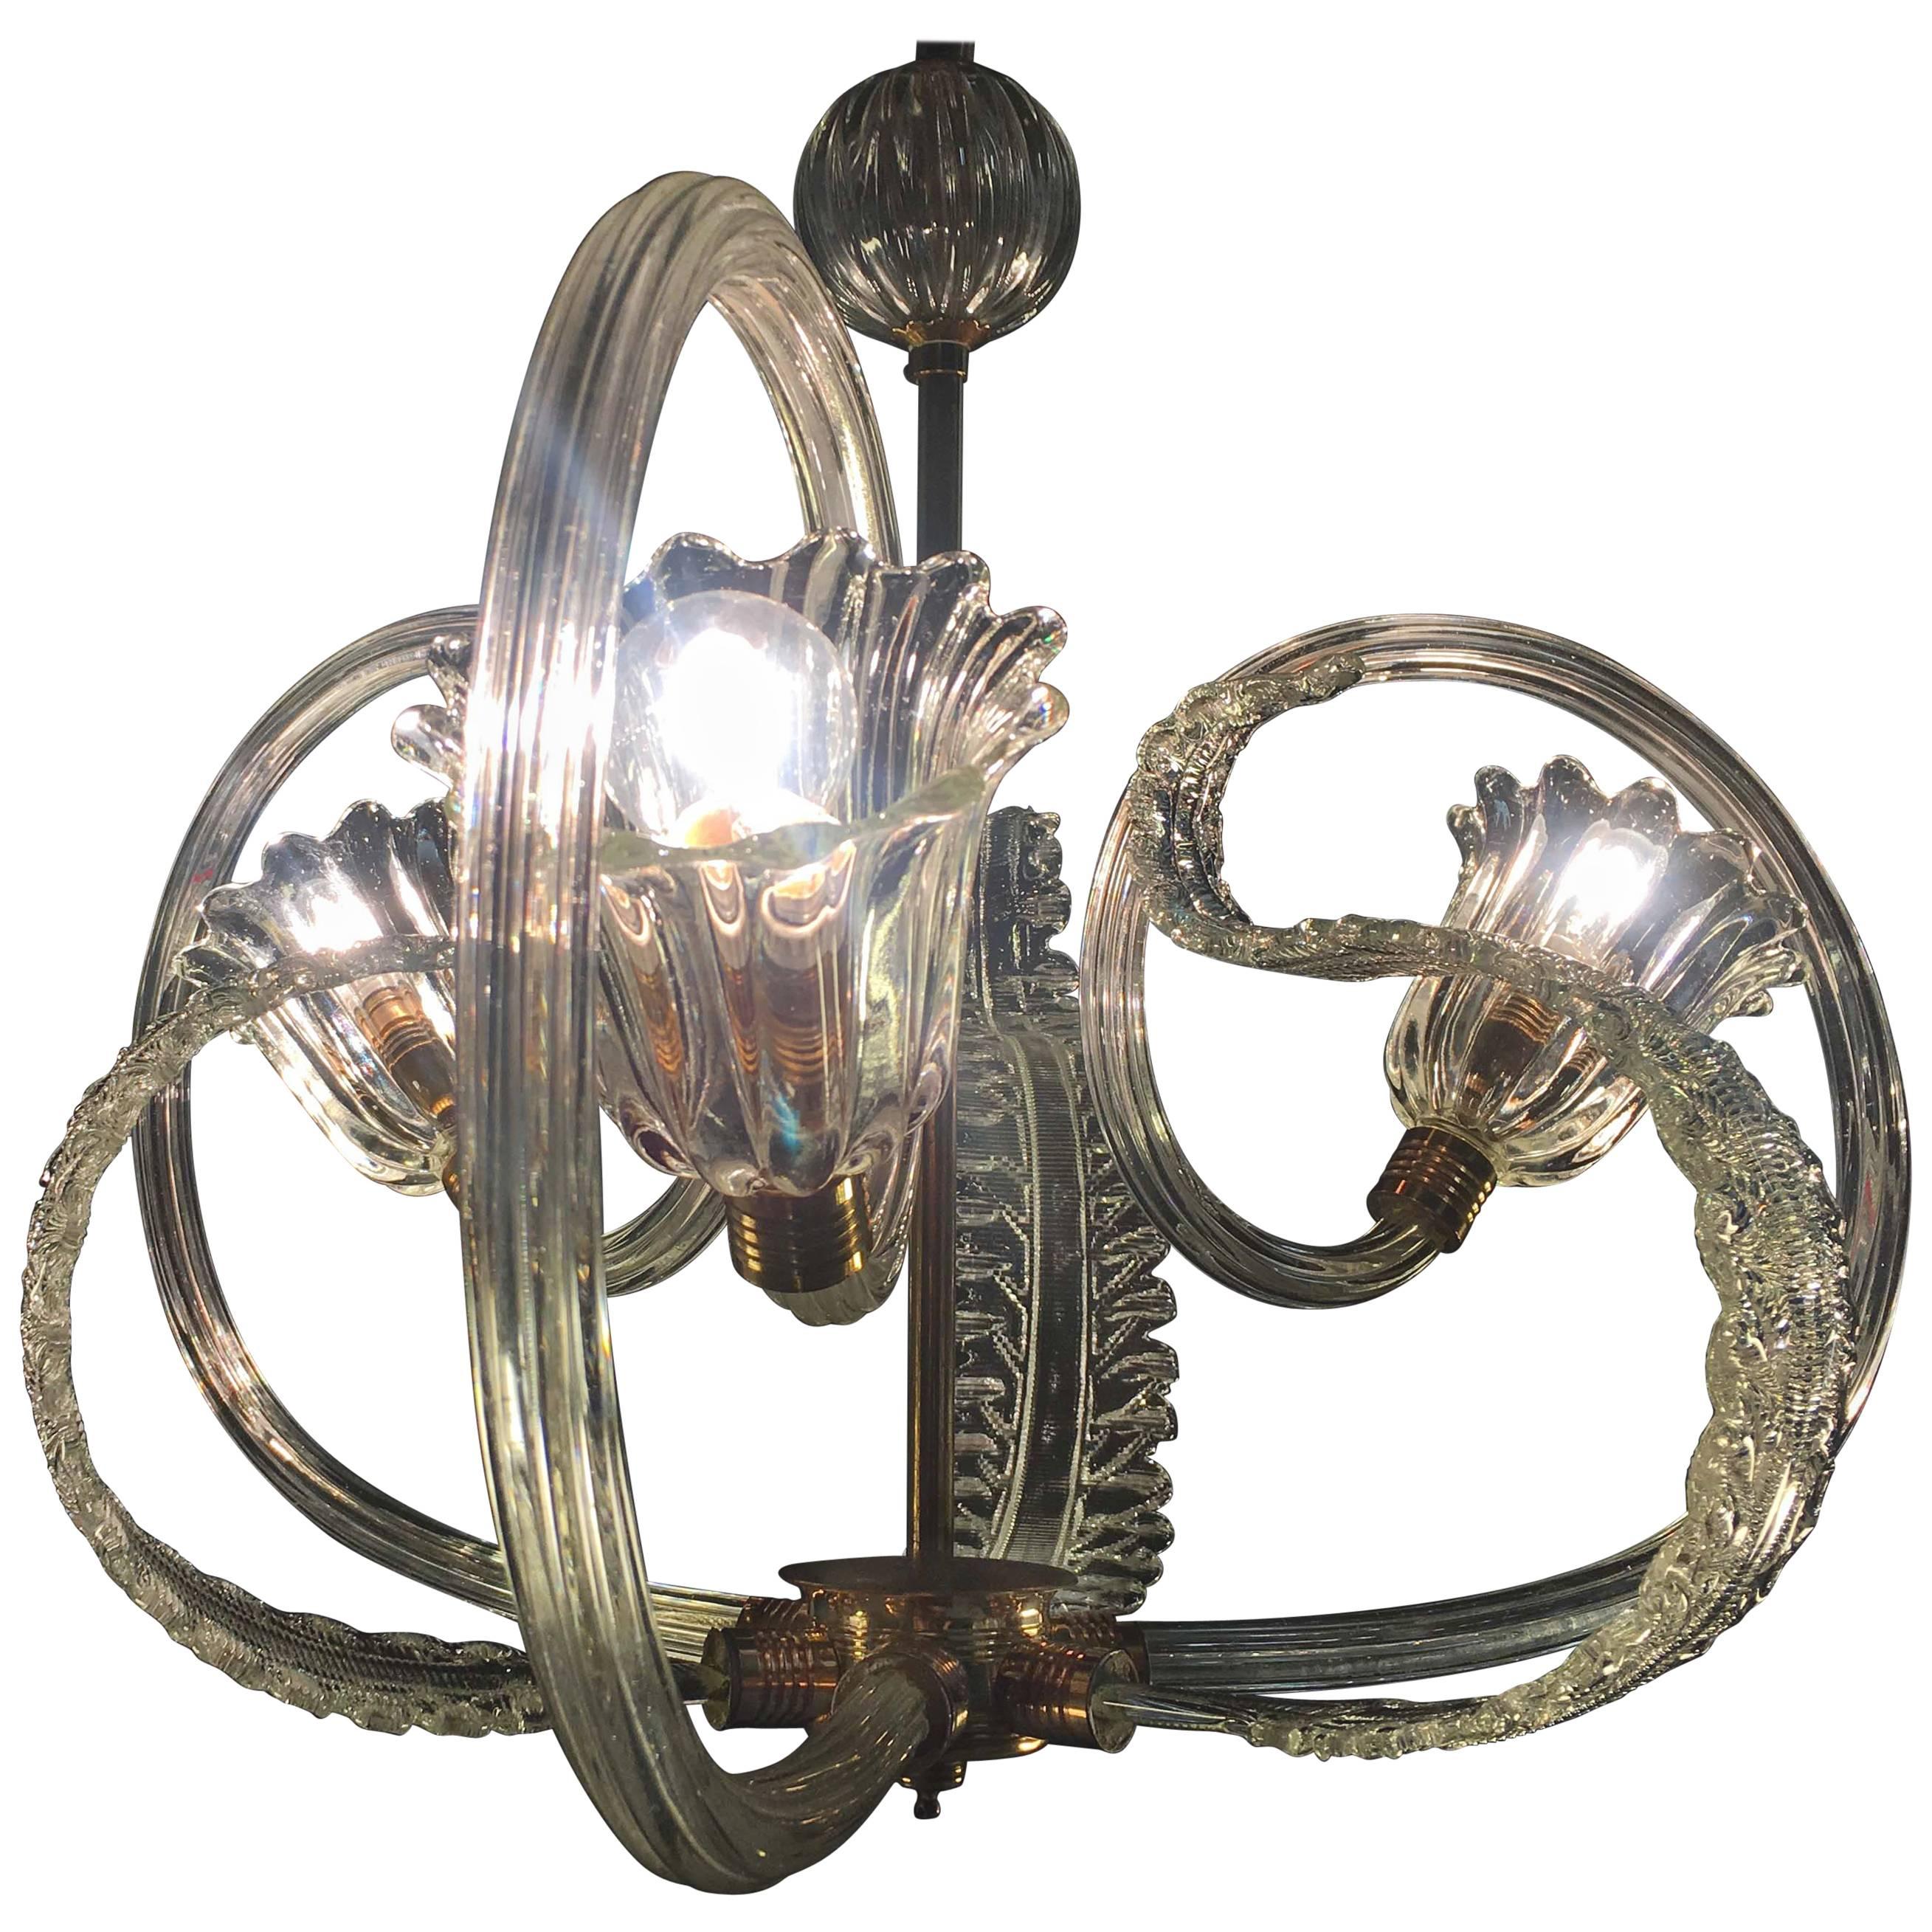 Charming Italian Chandelier by Barovier & Toso, Murano, 1940 For Sale